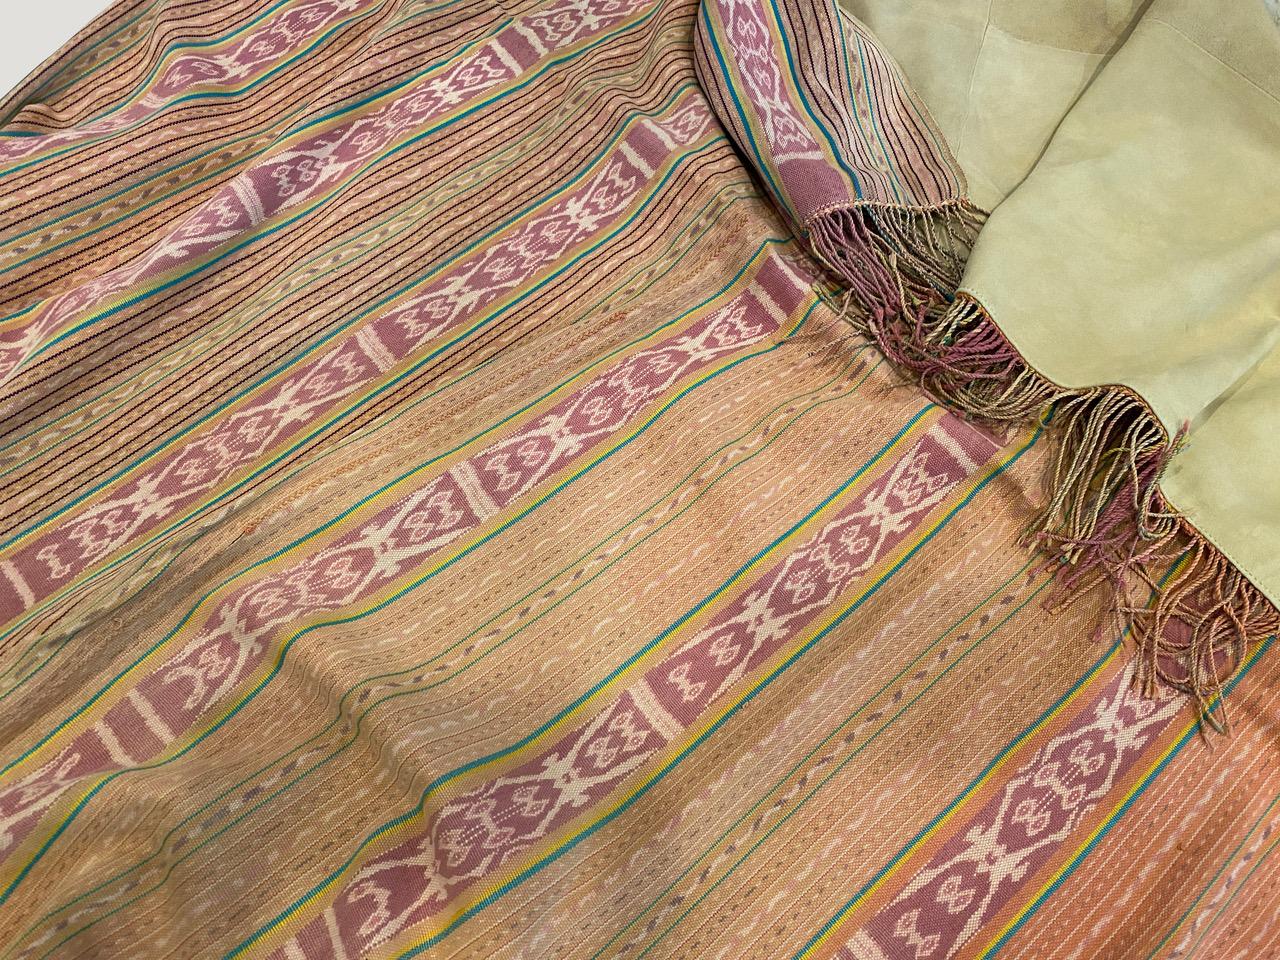 Beautiful antique Ikat textile from the island of Sumba, fully backed in a luxurious soft suede. The stripes seem modern yet mixed with the traditional motif panel, work so well together. Ikat is an ancient technique which is used to add patterns to